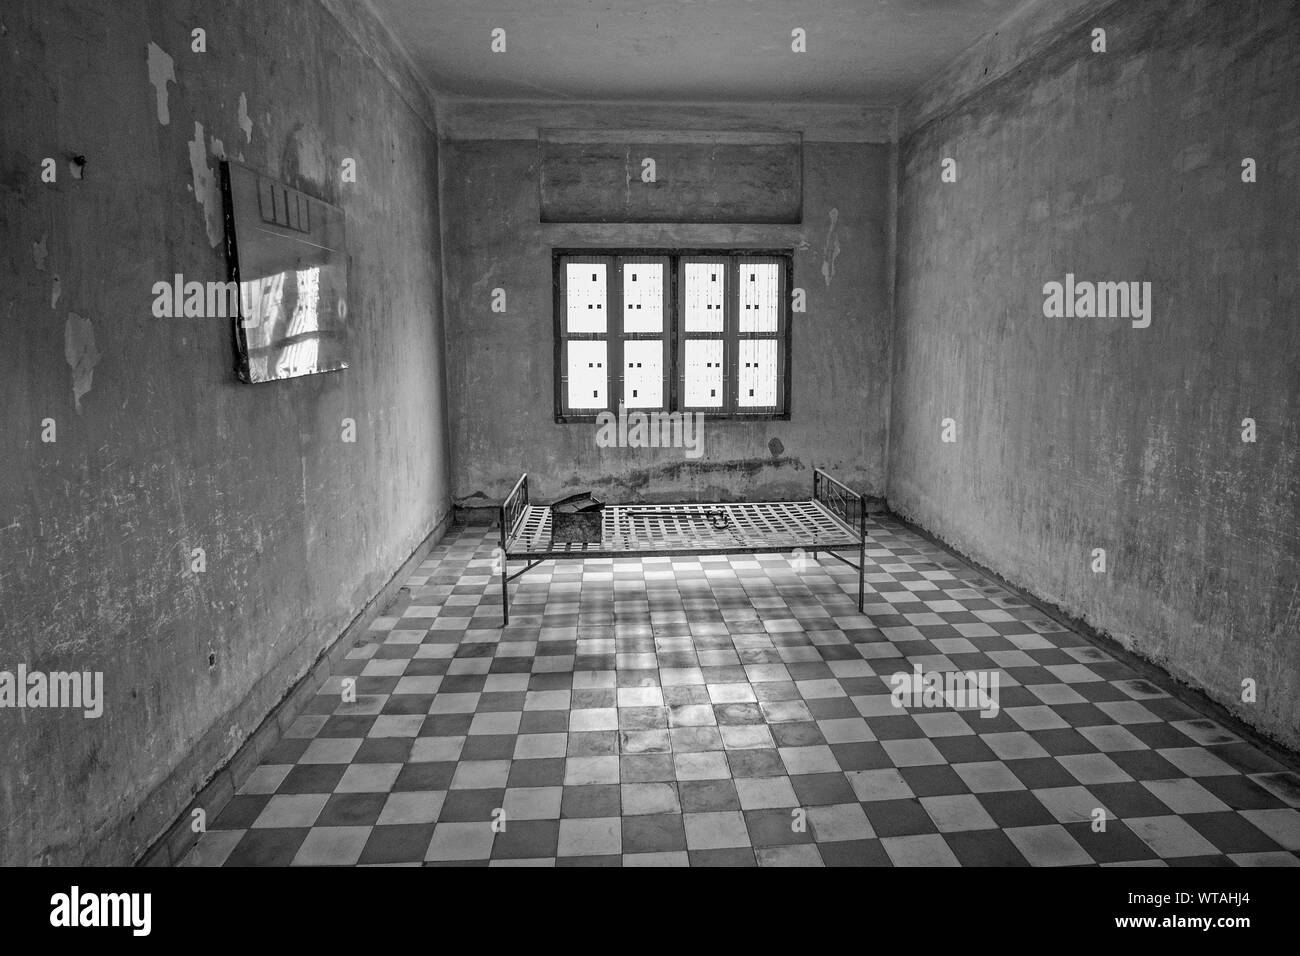 Torture Black And White Stock Photos Images Alamy